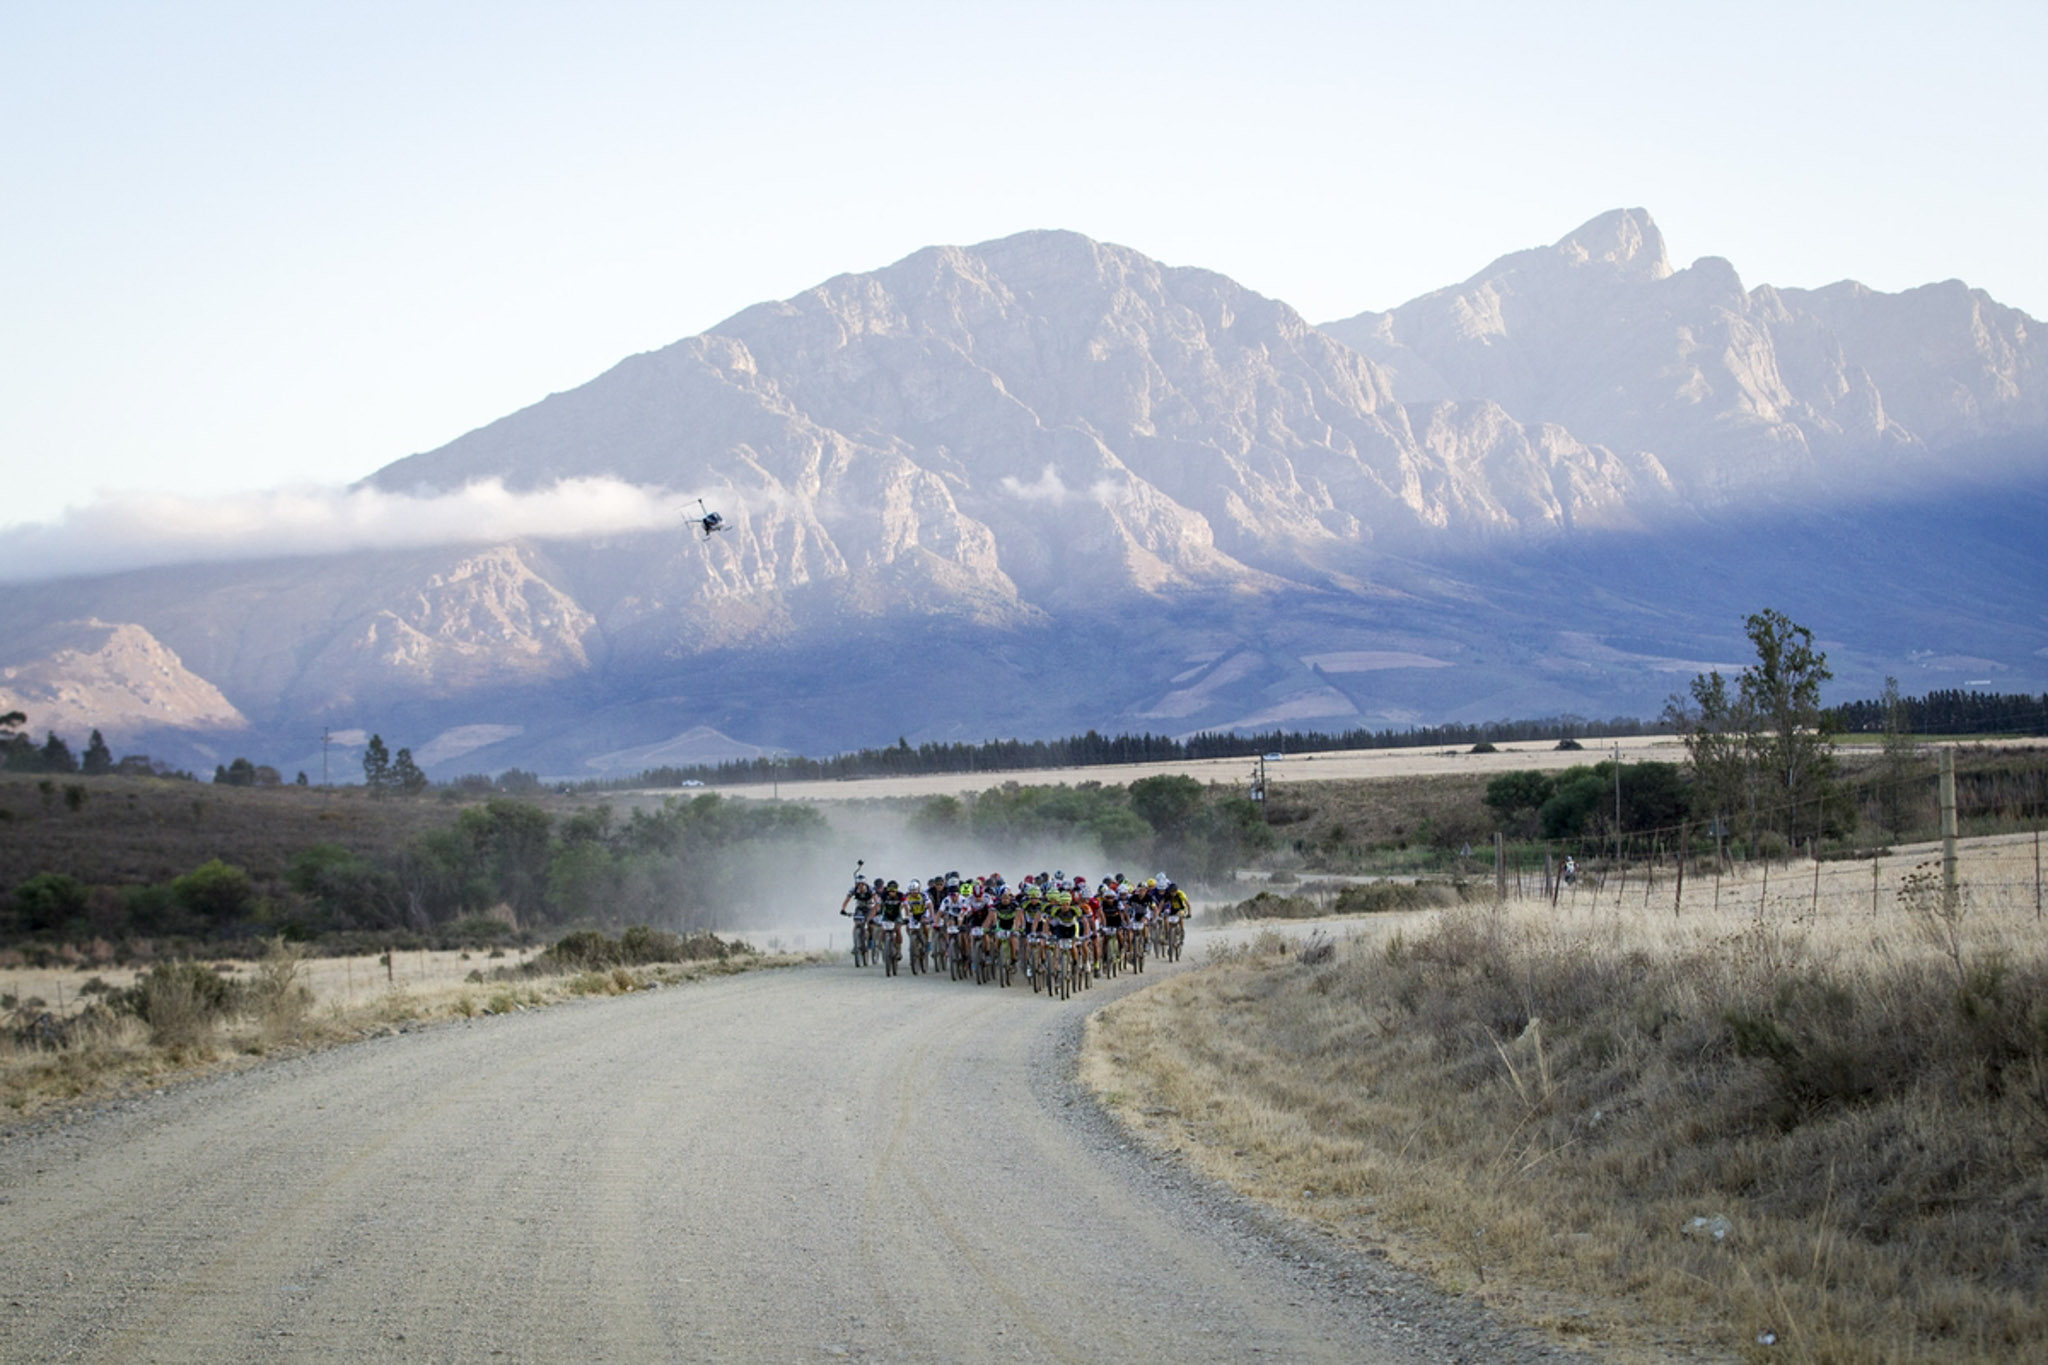 The lead bunch during stage 3 of the 2016 Absa Cape Epic Mountain Bike stage race held from Saronsberg Wine Estate in Tulbagh to the Cape Peninsula University of Technology in Wellington, South Africa on the 16th March 2016 Photo by Nick Muzik/Cape Epic/SPORTZPICS PLEASE ENSURE THE APPROPRIATE CREDIT IS GIVEN TO THE PHOTOGRAPHER AND SPORTZPICS ALONG WITH THE ABSA CAPE EPIC ace2016